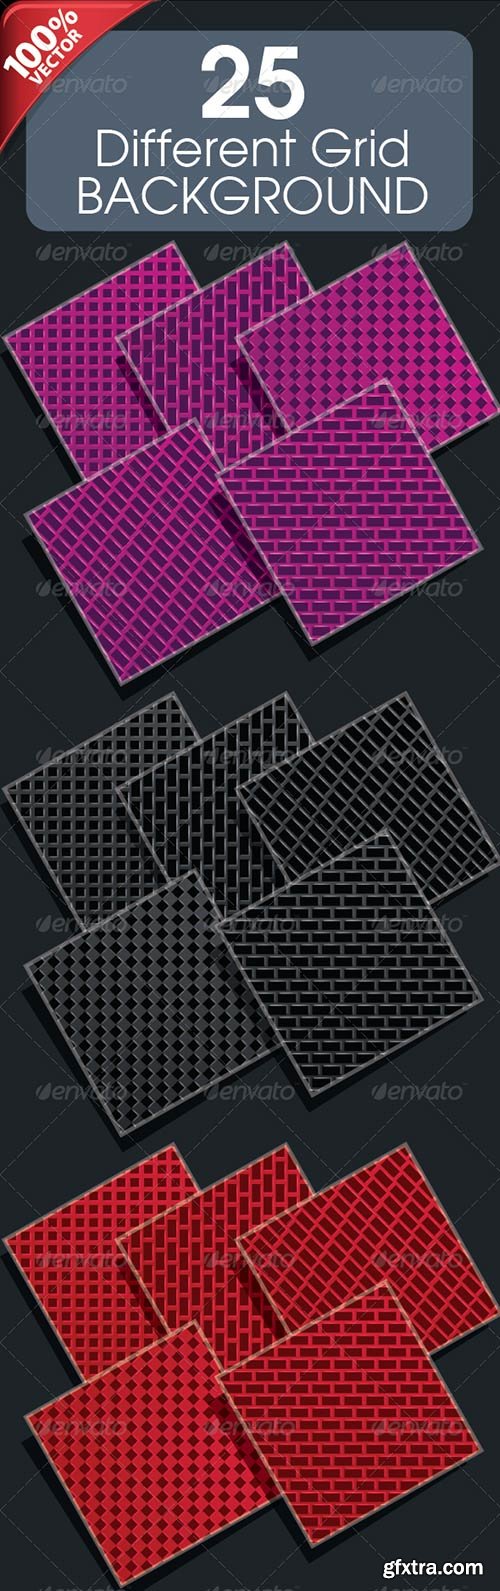 GraphicRiver - 25 Different Grid Background